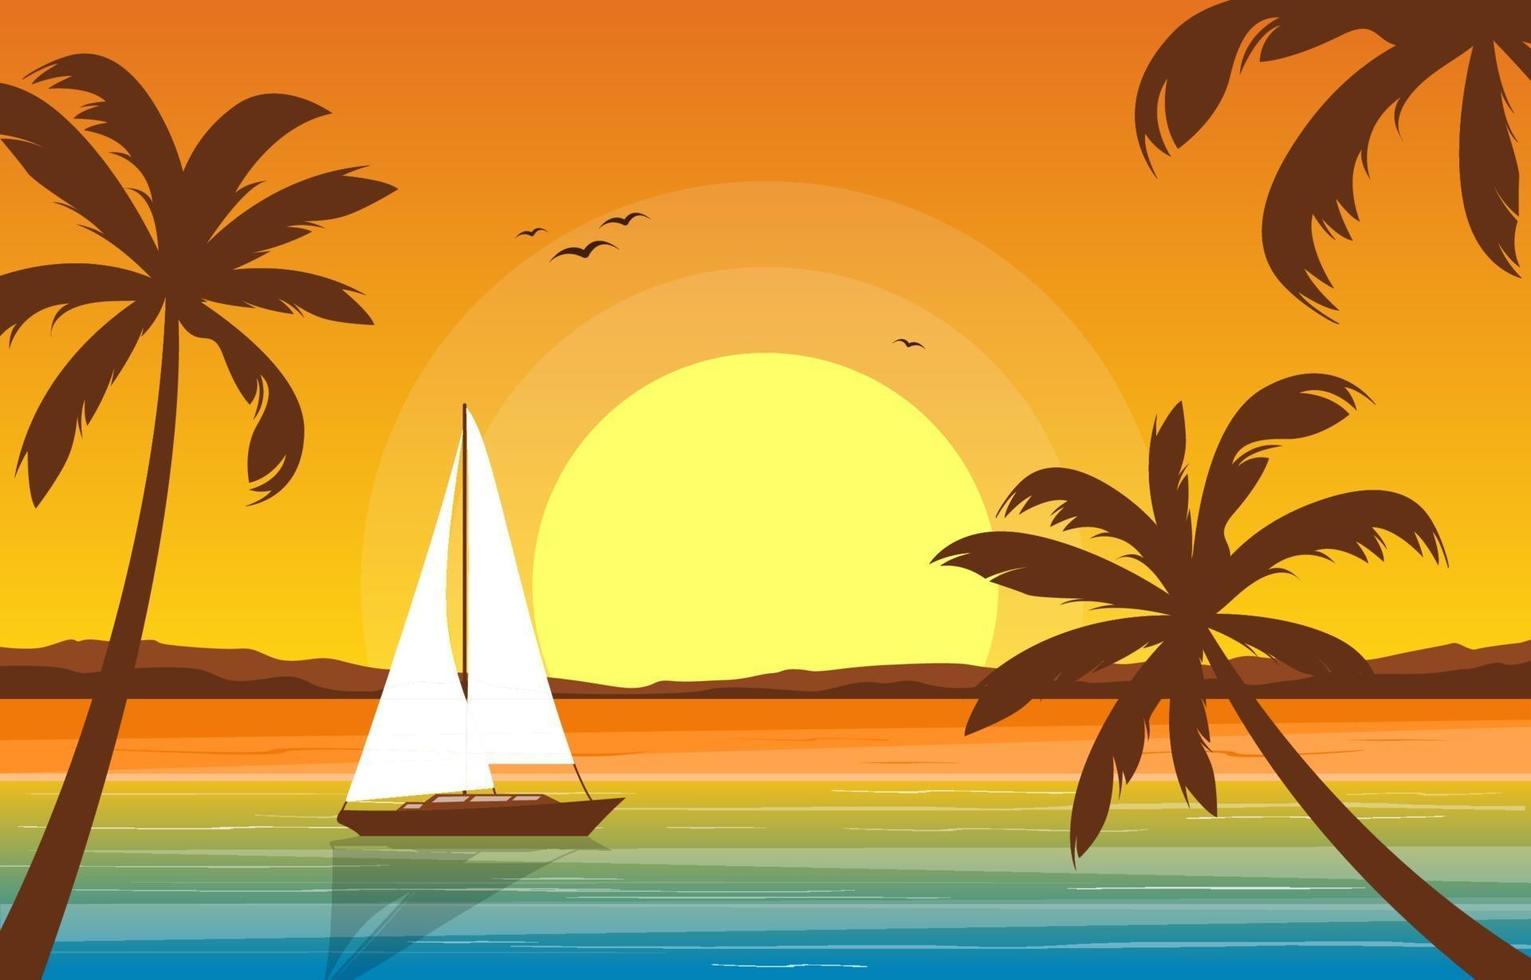 Vacation in Tropical Beach Landscape with Palm Trees vector